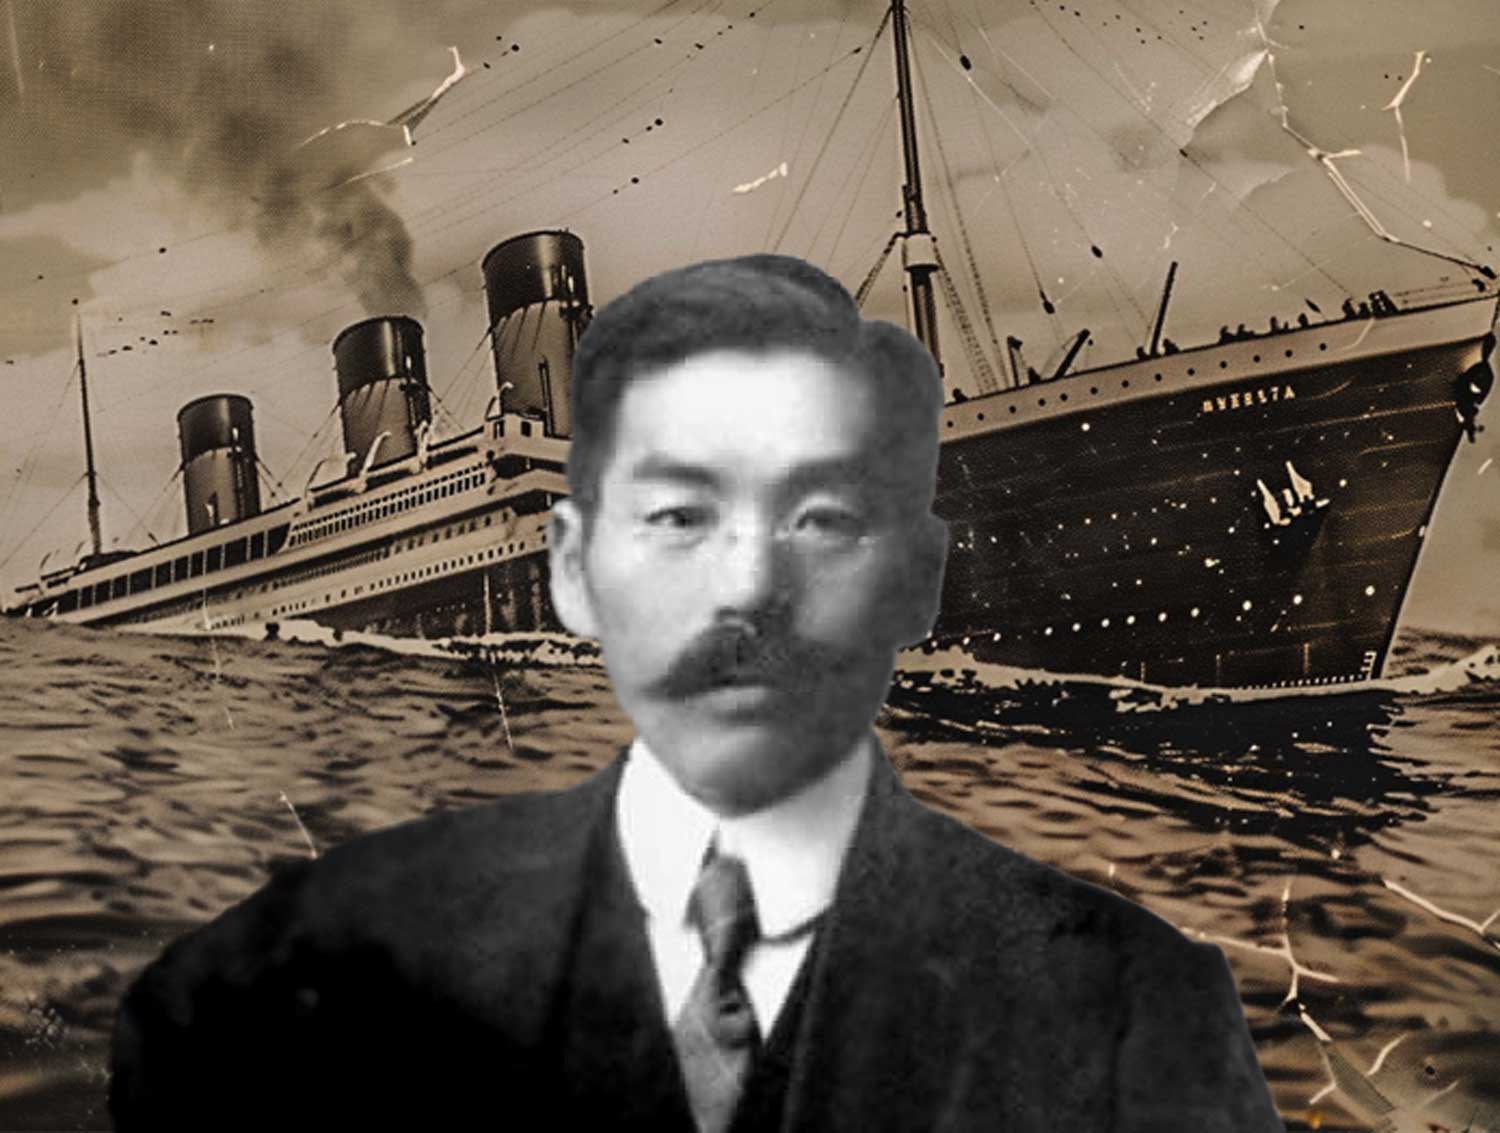 The Japanese passenger who survived the Titanic but faced unbearable shaming at home